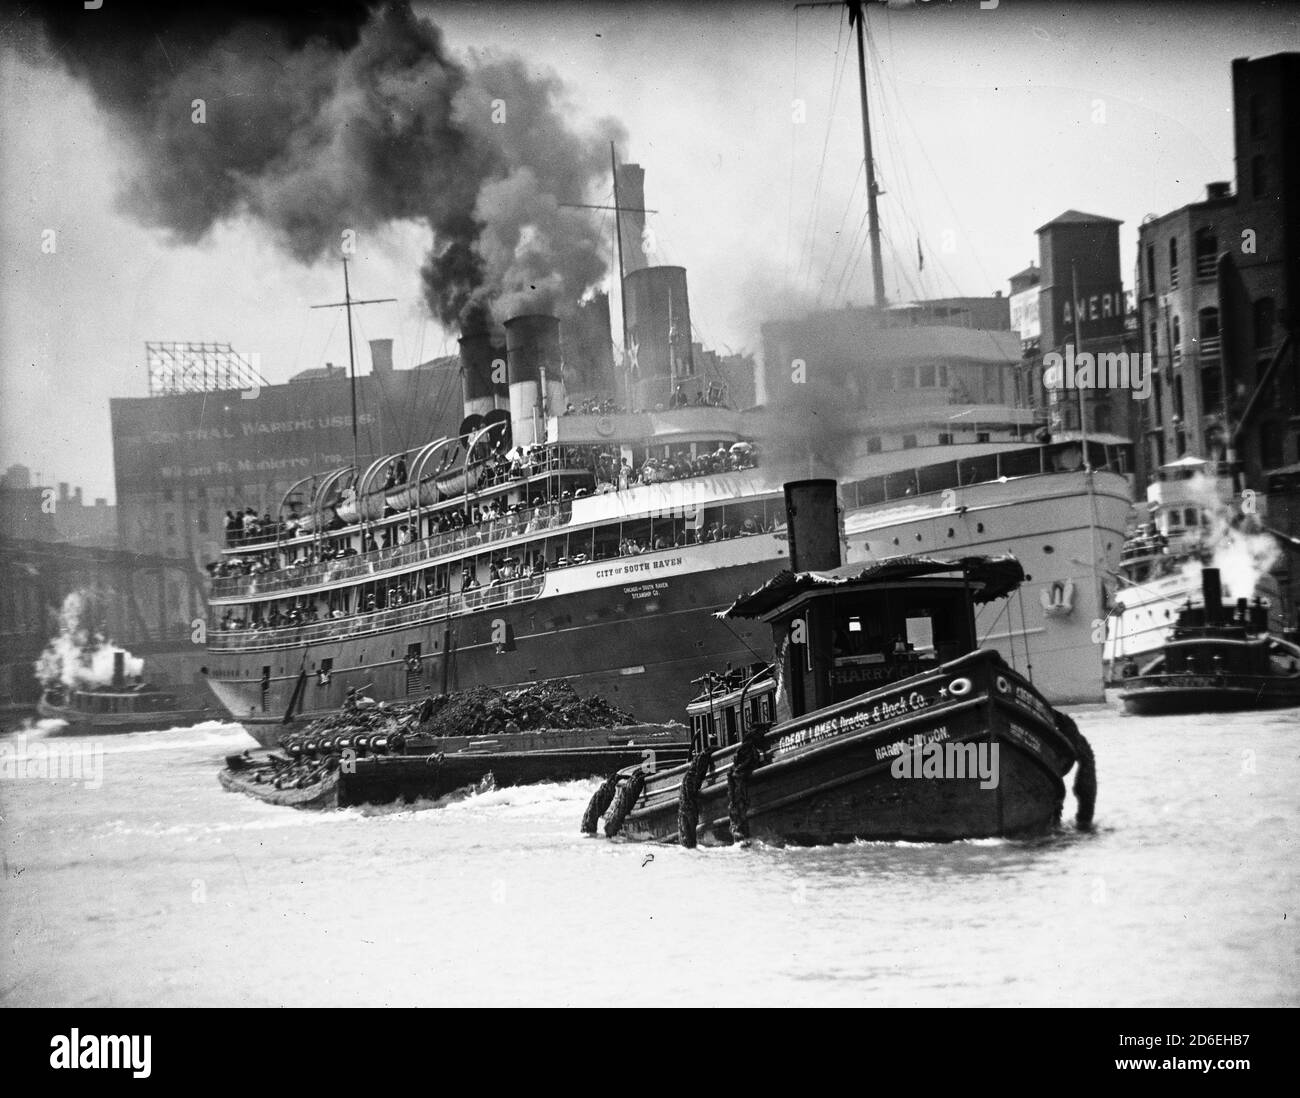 View of South Haven, Michigan tugboat and passenger ferry on the Chicago River, Chicago, Illinois, circa 1915. Stock Photo